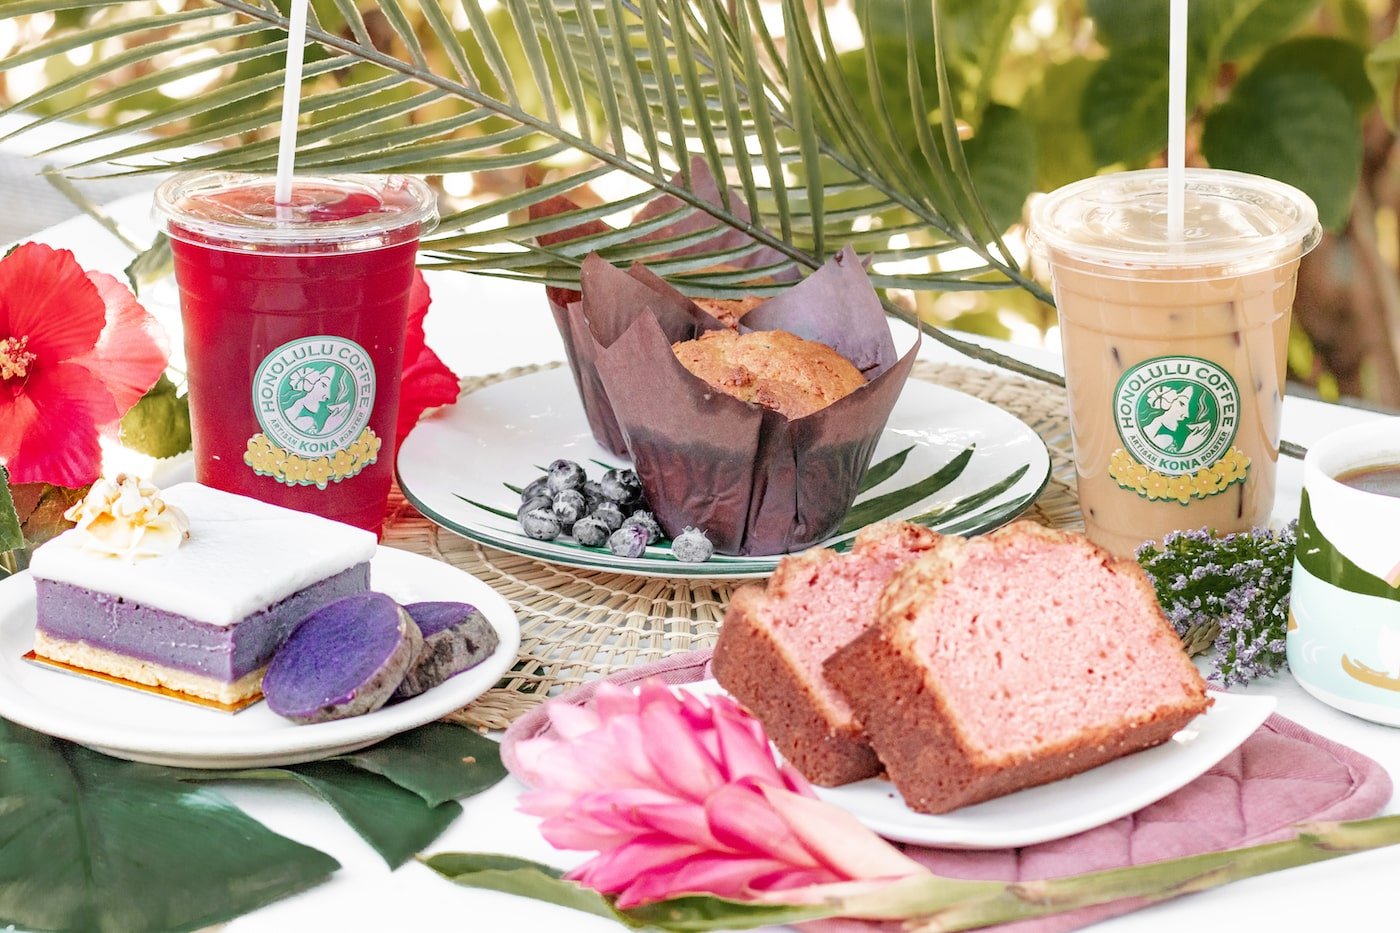 New Tropical Spring Menu at Honolulu Coffee, including Guava Bread and the Lavender Latte